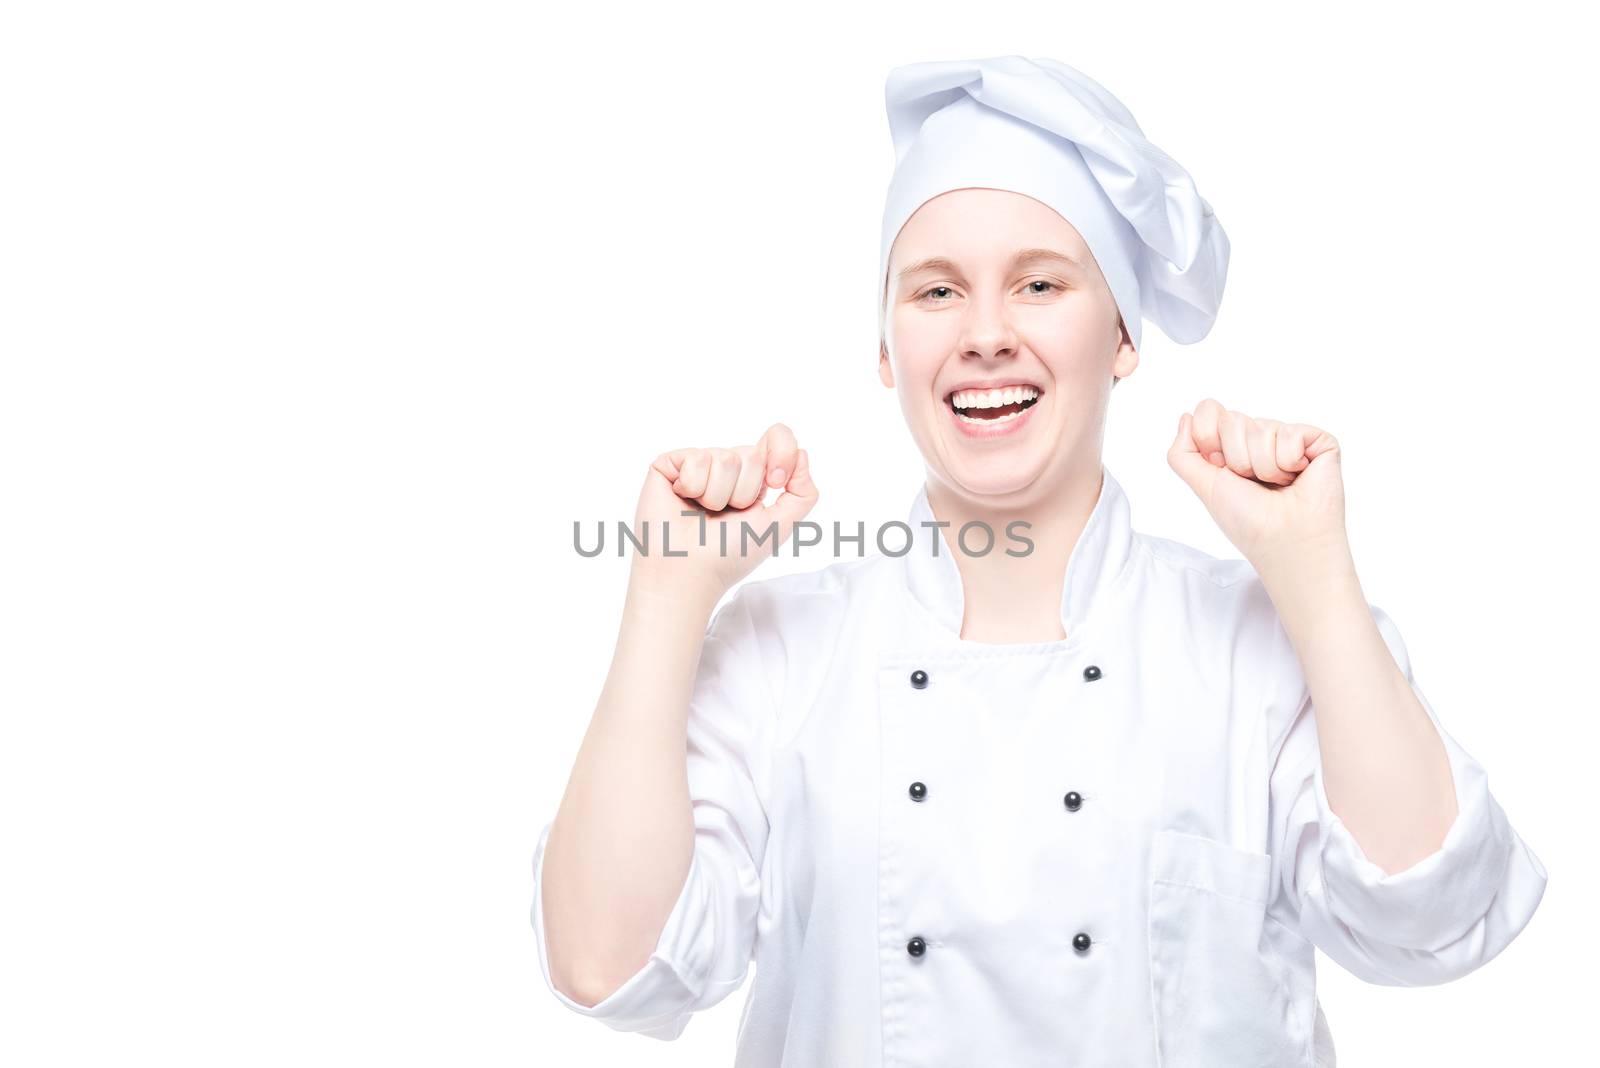 joyful chef in costume rejoices in victory, emotional portrait o by kosmsos111